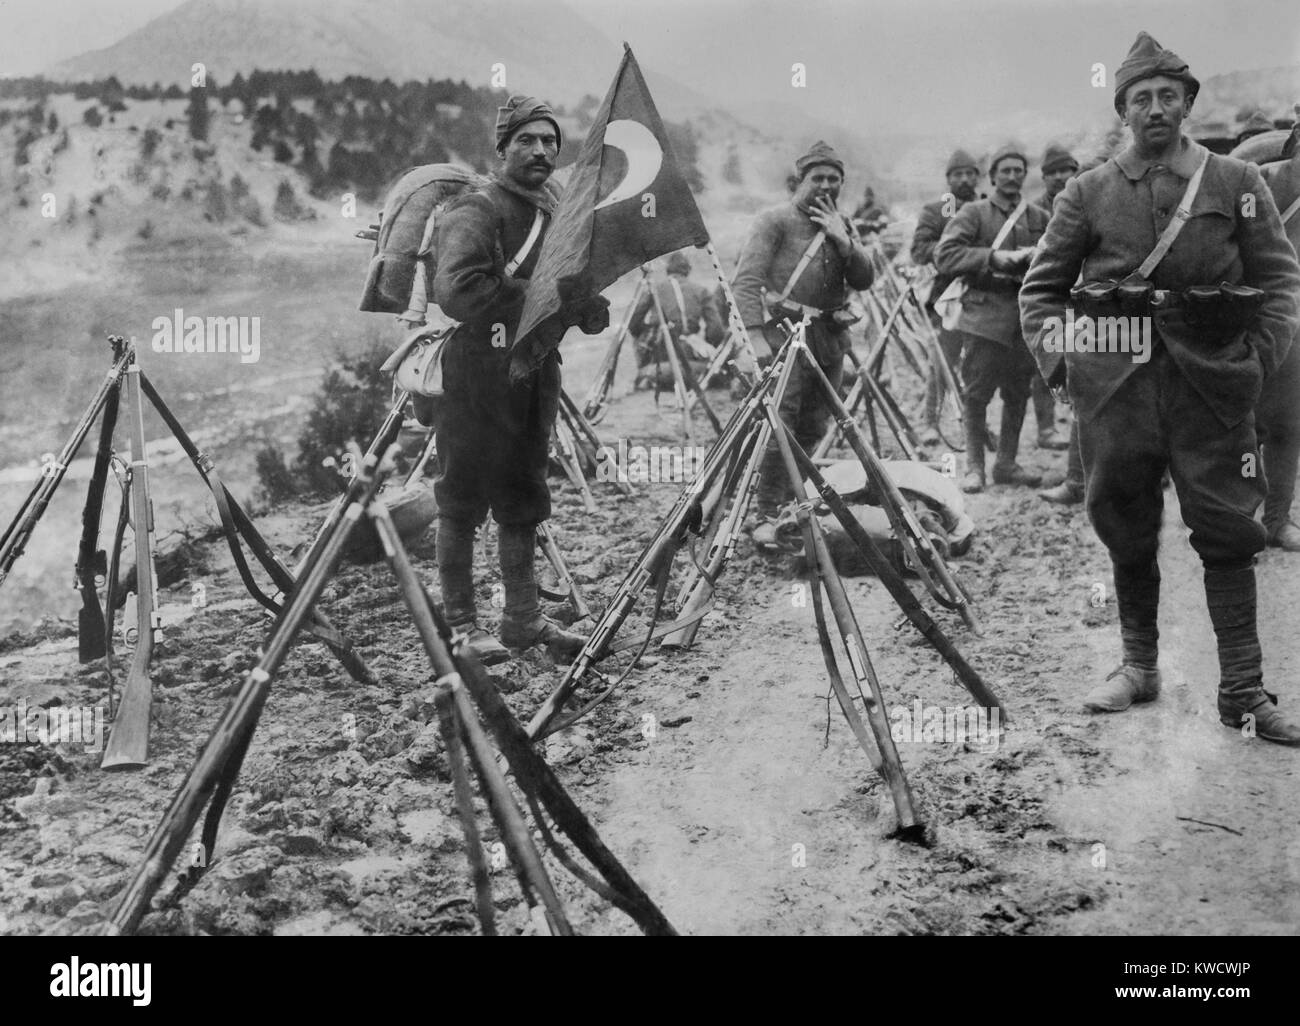 Turkish infantry column at rest with flag and rifles during World War I. (BSLOC 2017 1 149) Stock Photo